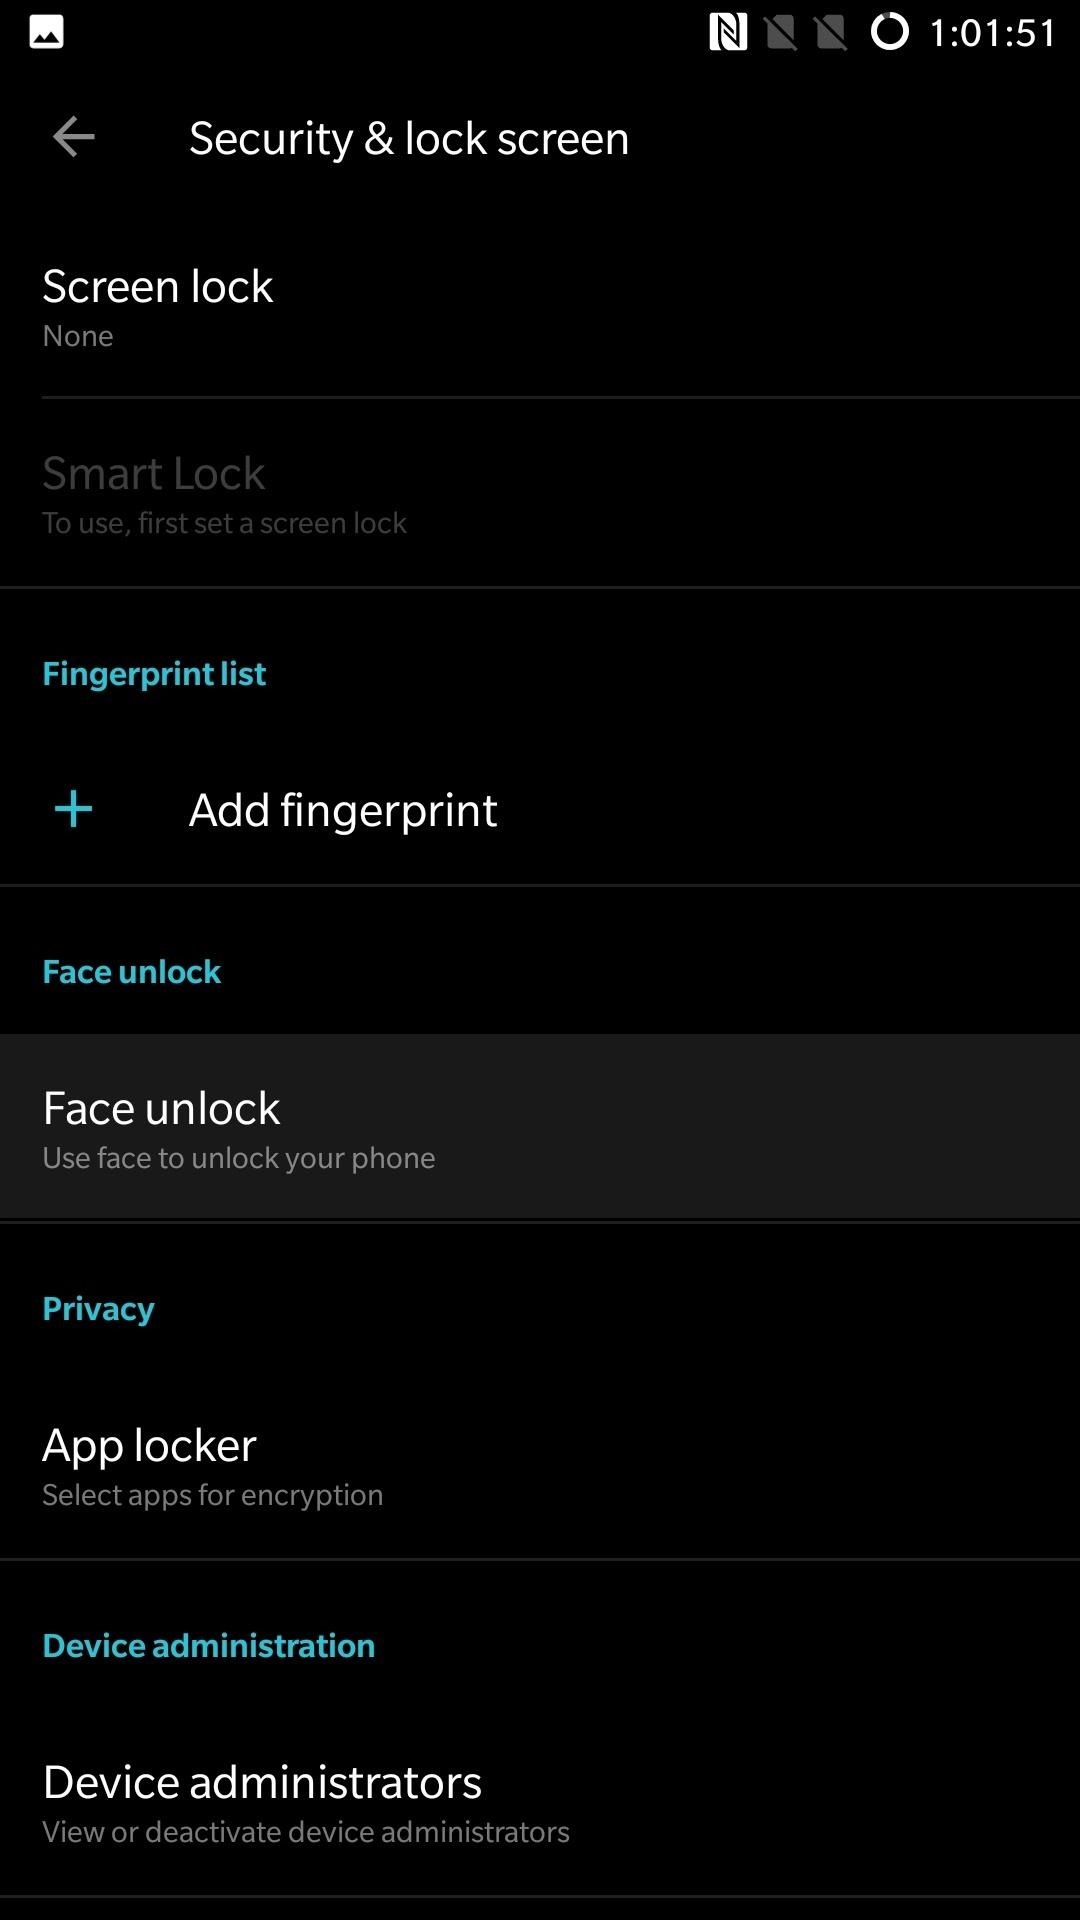 OxygenOS Update Finally Brings Face Unlock to All OnePlus 5 Users